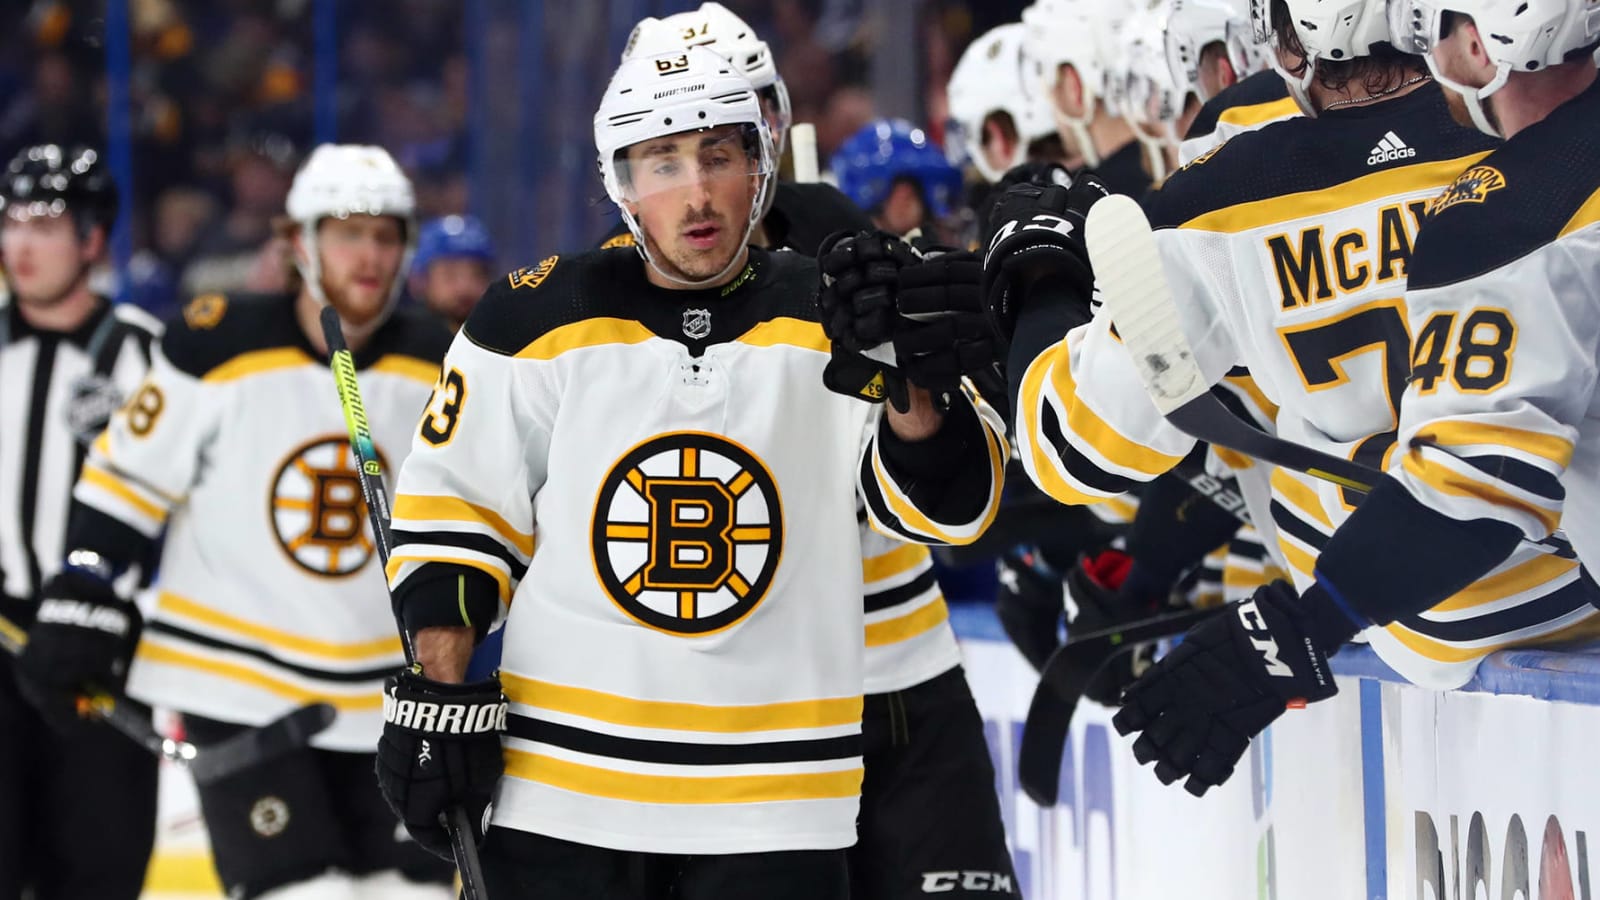 The 'Bruins with 100 points in a season' quiz